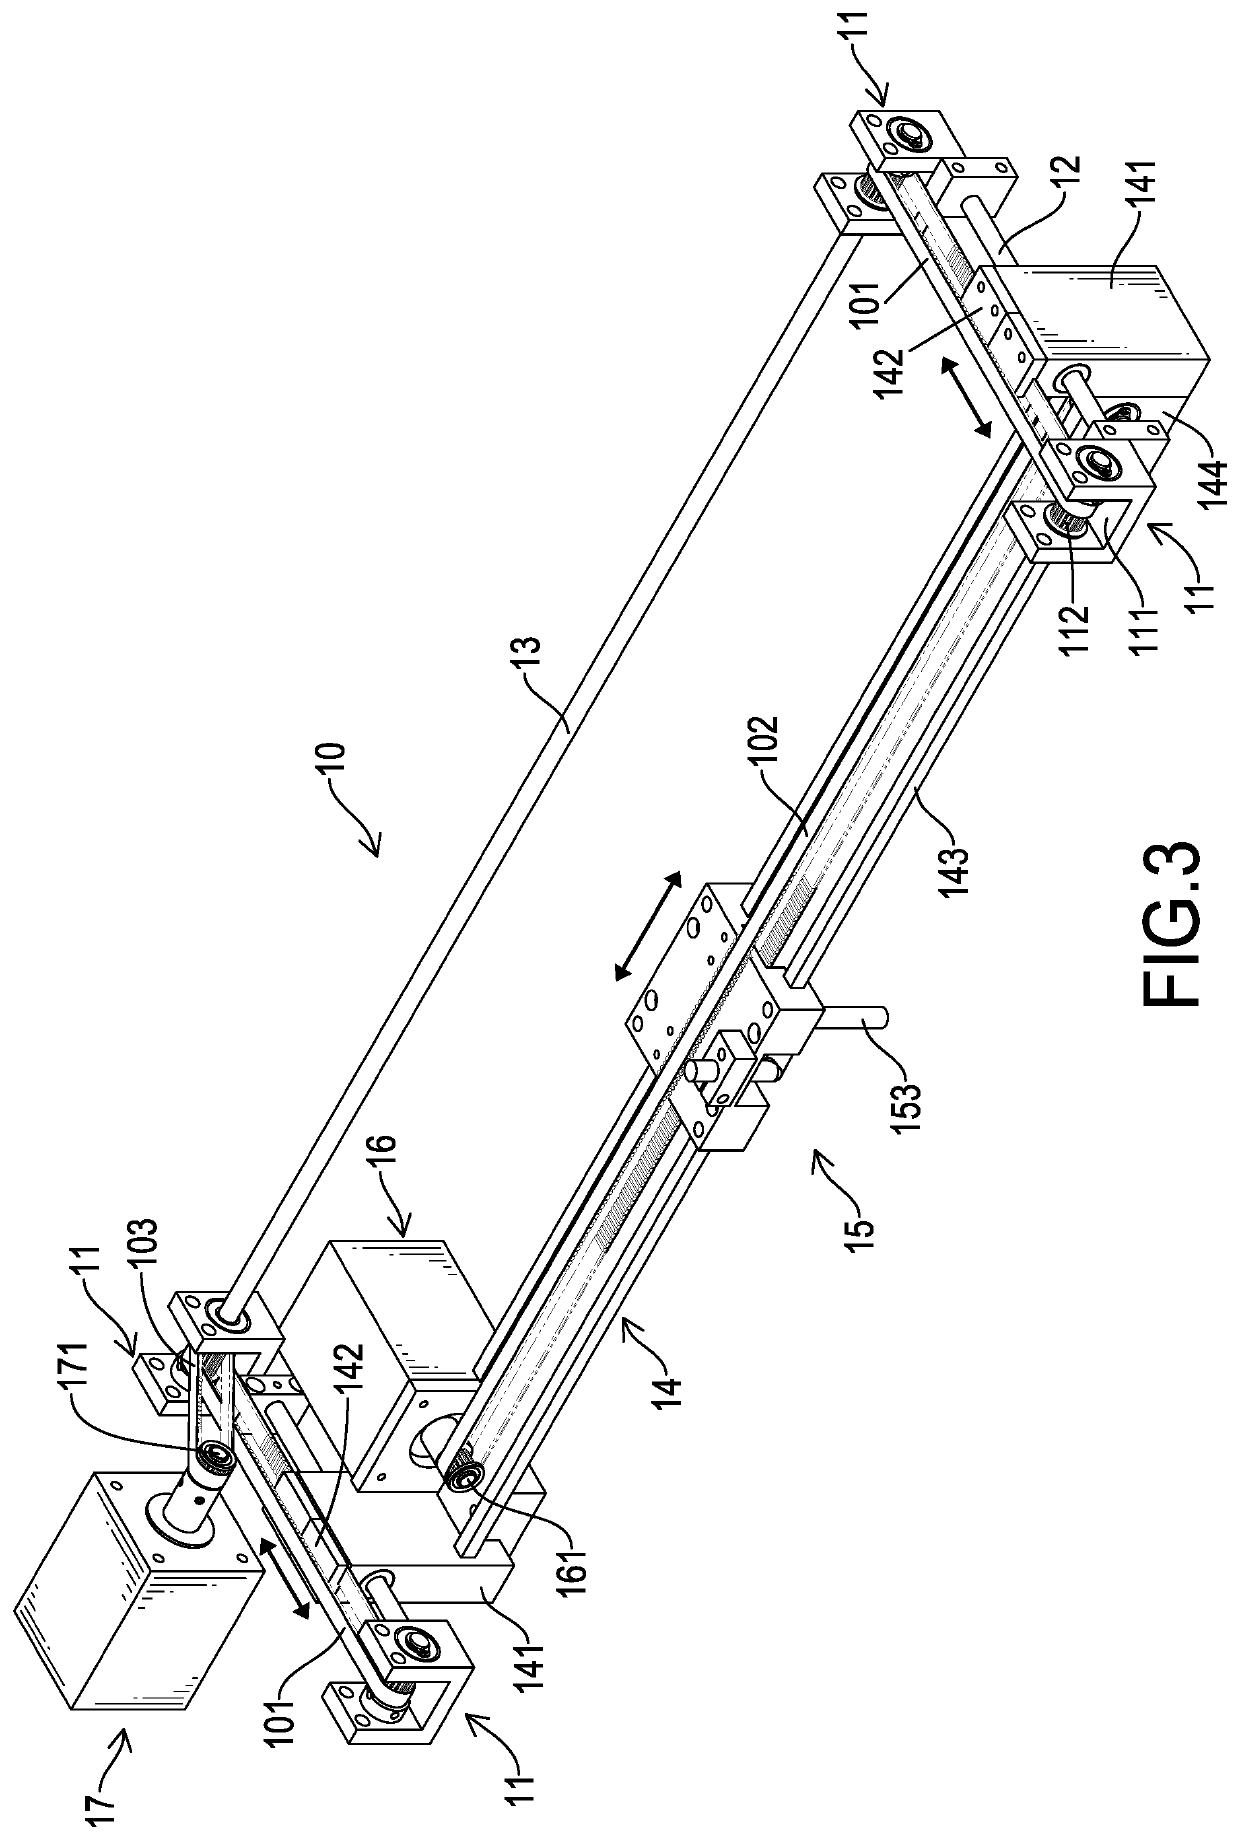 Nozzle-moving device